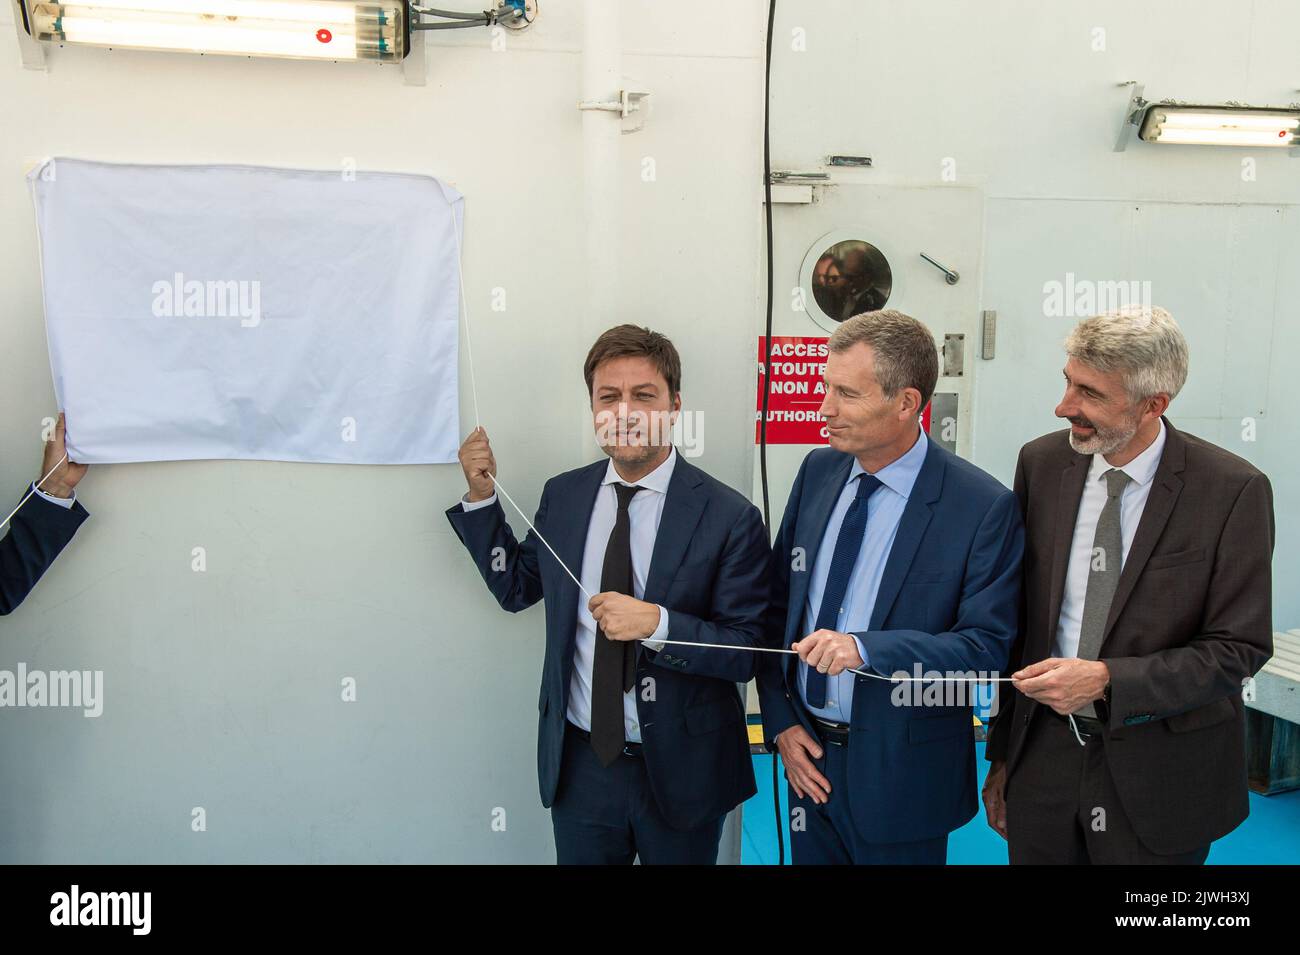 (from L to R) Benoit Payan (Marseille's mayor), Christophe Mirmand (Prefect) and Benoit Dehaye (CEO of La Meridonale Company) ready to unveil the inaugural plaque. The Piana is a ferry of the Compagnie Meridionale de Navigation (named La Meridionale) that connects Marseille to Ajaccio. After 5 years of studies and two years of field tests, it is the first ship in the world to be equipped with a particle filter technology that eliminates up to 99.9% of fine and superfine particles. Toxic emissions from shipping in Marseille are a major public health concern. This technology developed by CMN and Stock Photo